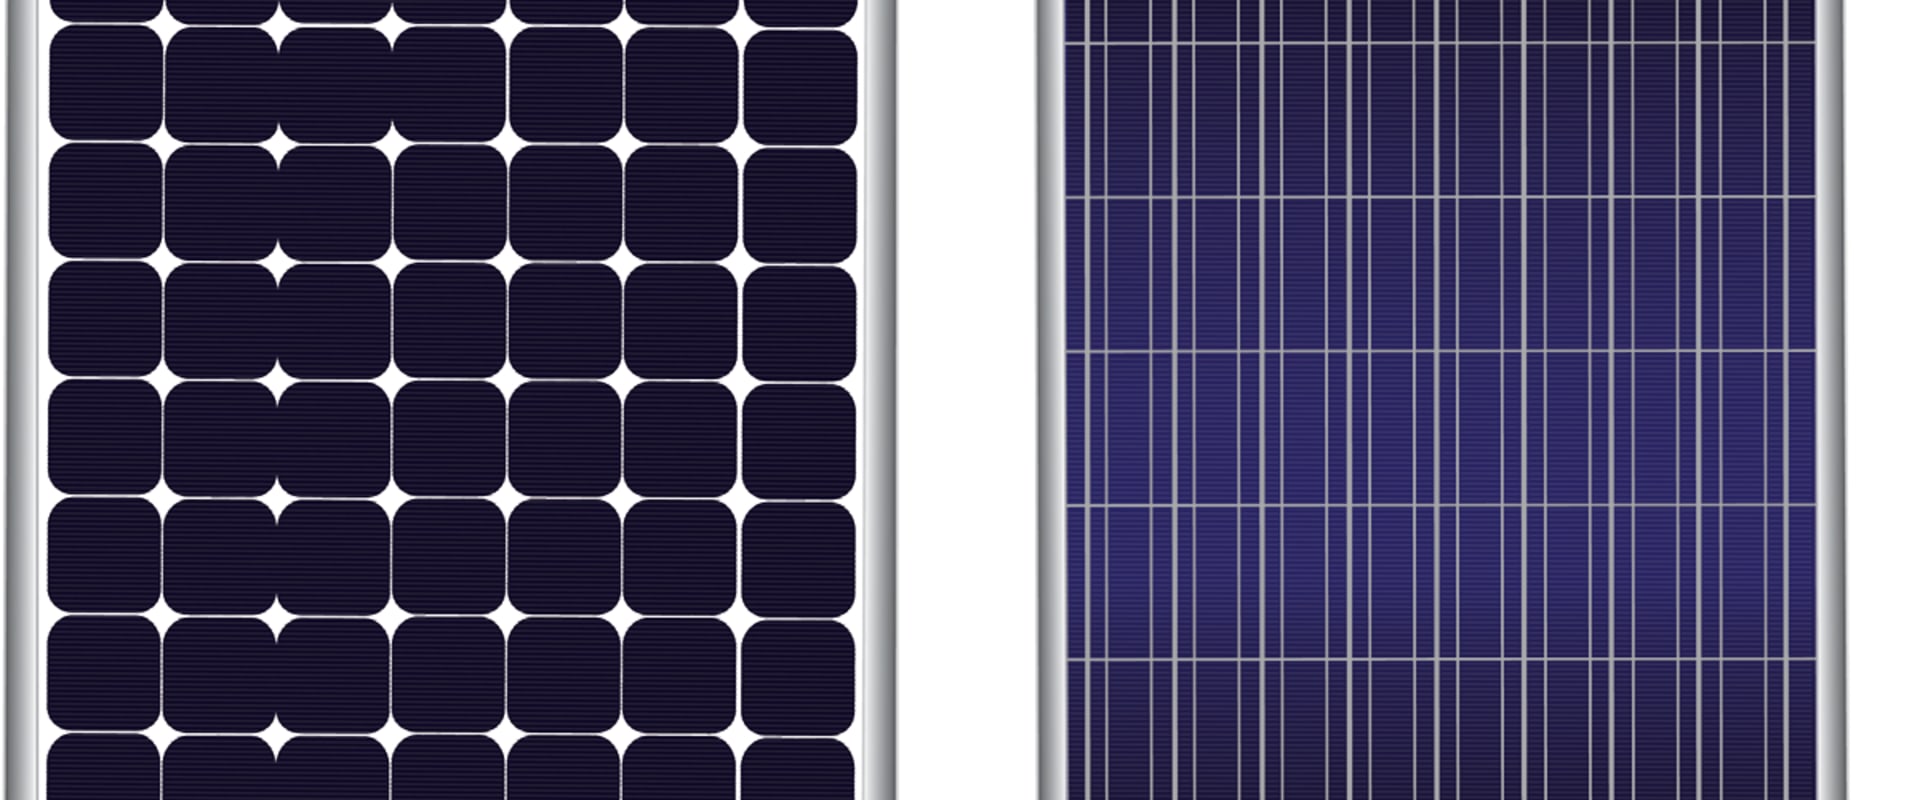 Which Solar Panel is Cheaper: Monocrystalline or Polycrystalline?